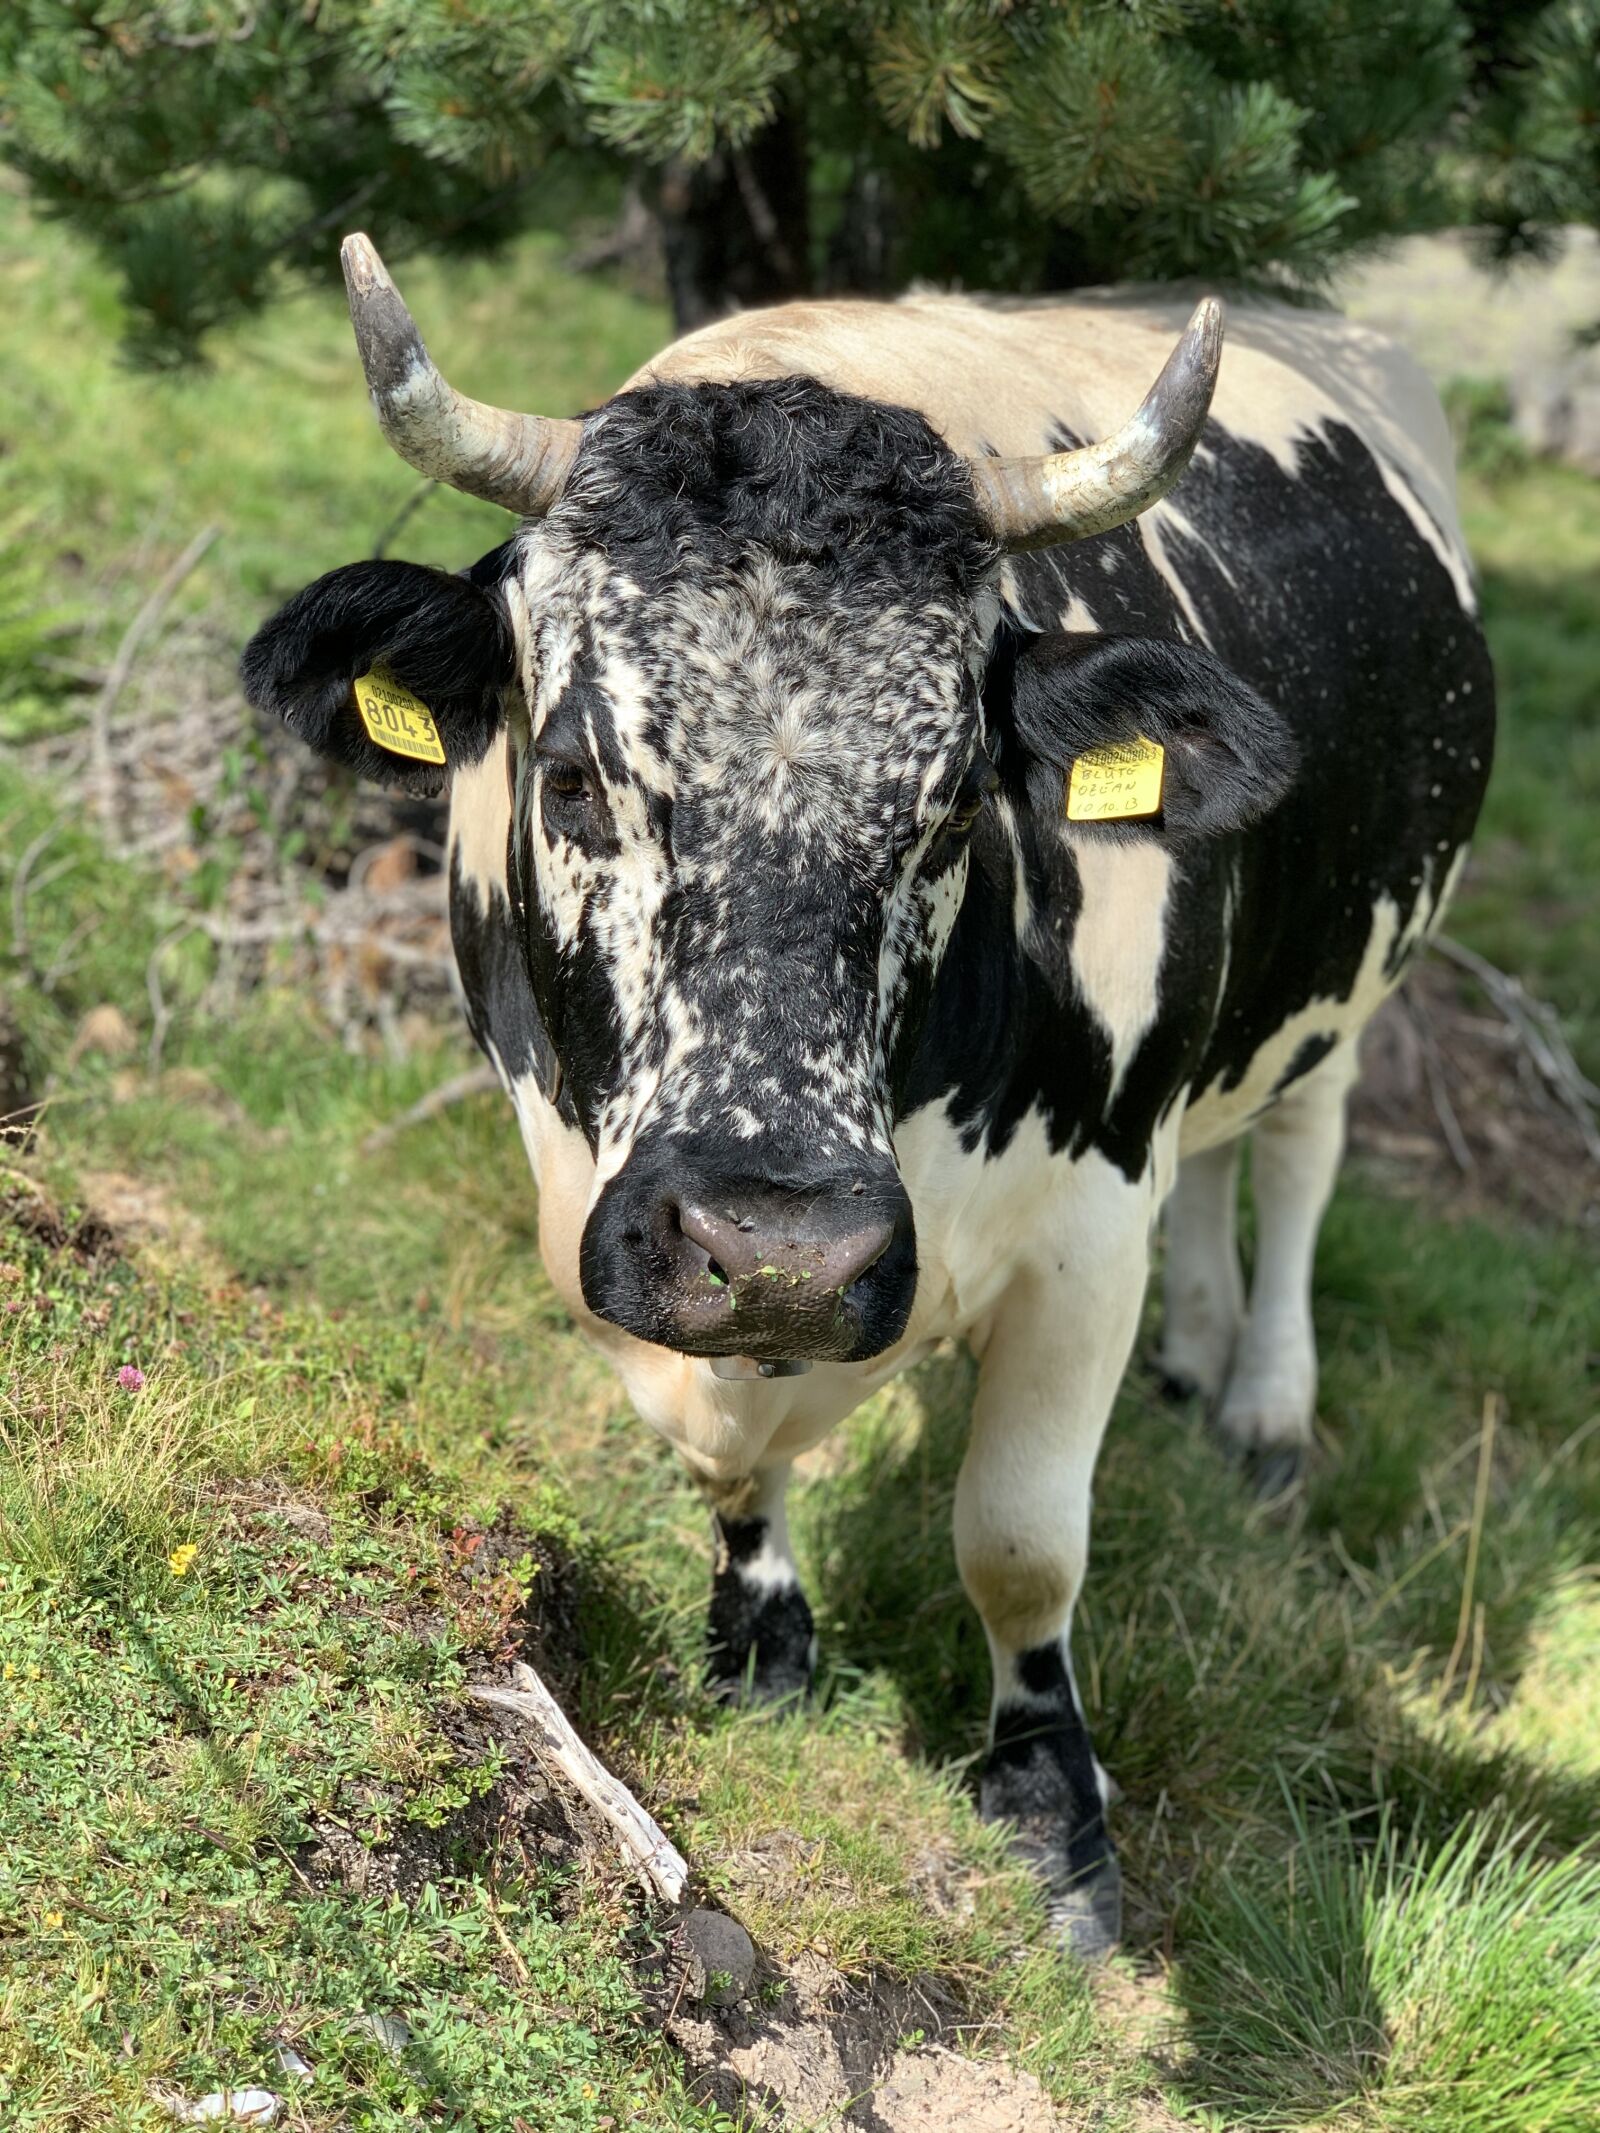 iPhone XS back dual camera 6mm f/2.4 sample photo. Cow, nature, cows photography